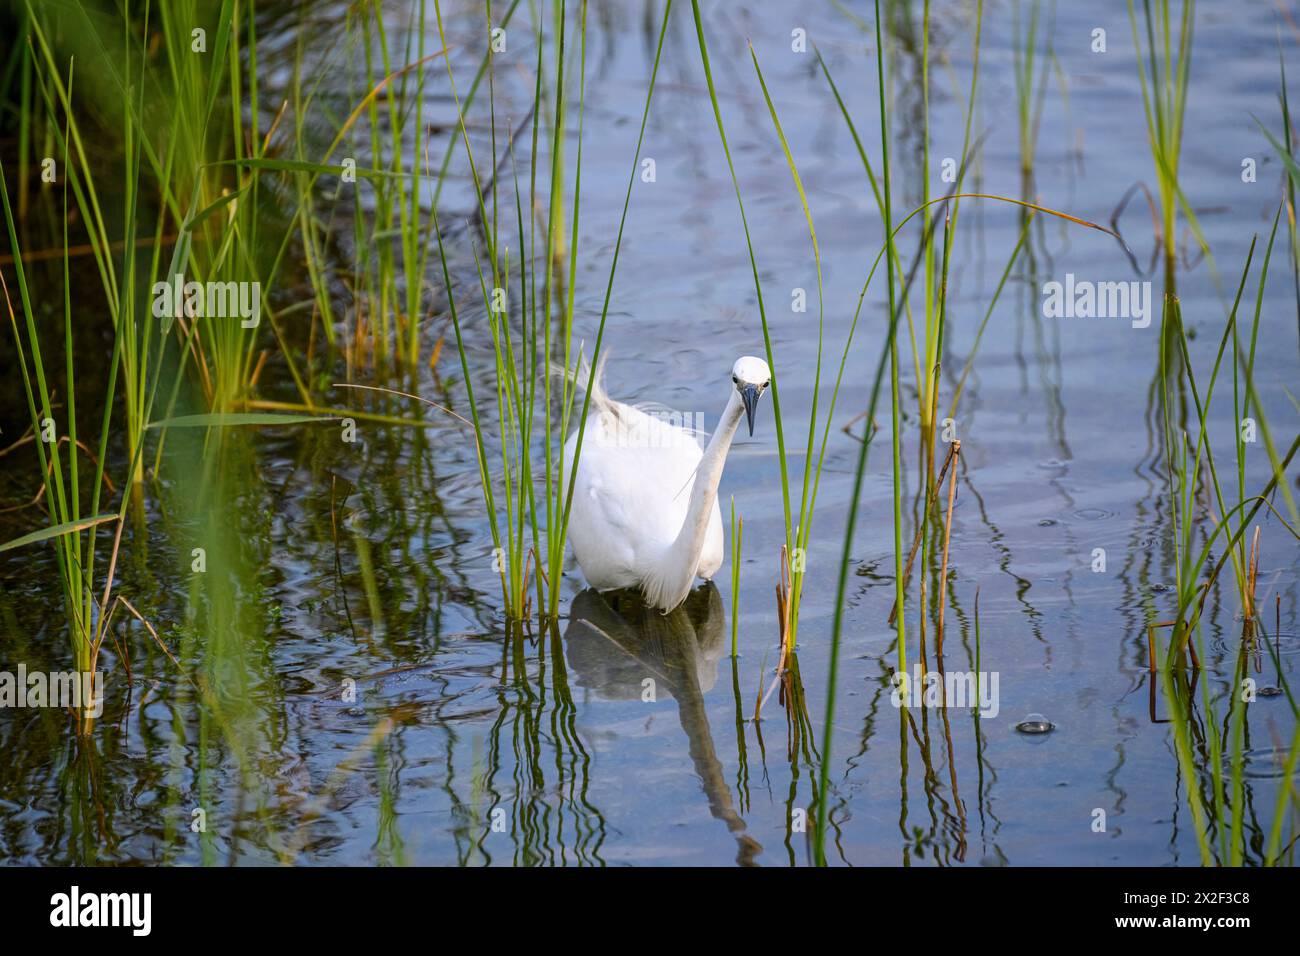 Egretta garzetta - Little Egret, This small white heron is native to warmer parts of Europe and Asia, Photographed at the man-made ecological pond and Stock Photo